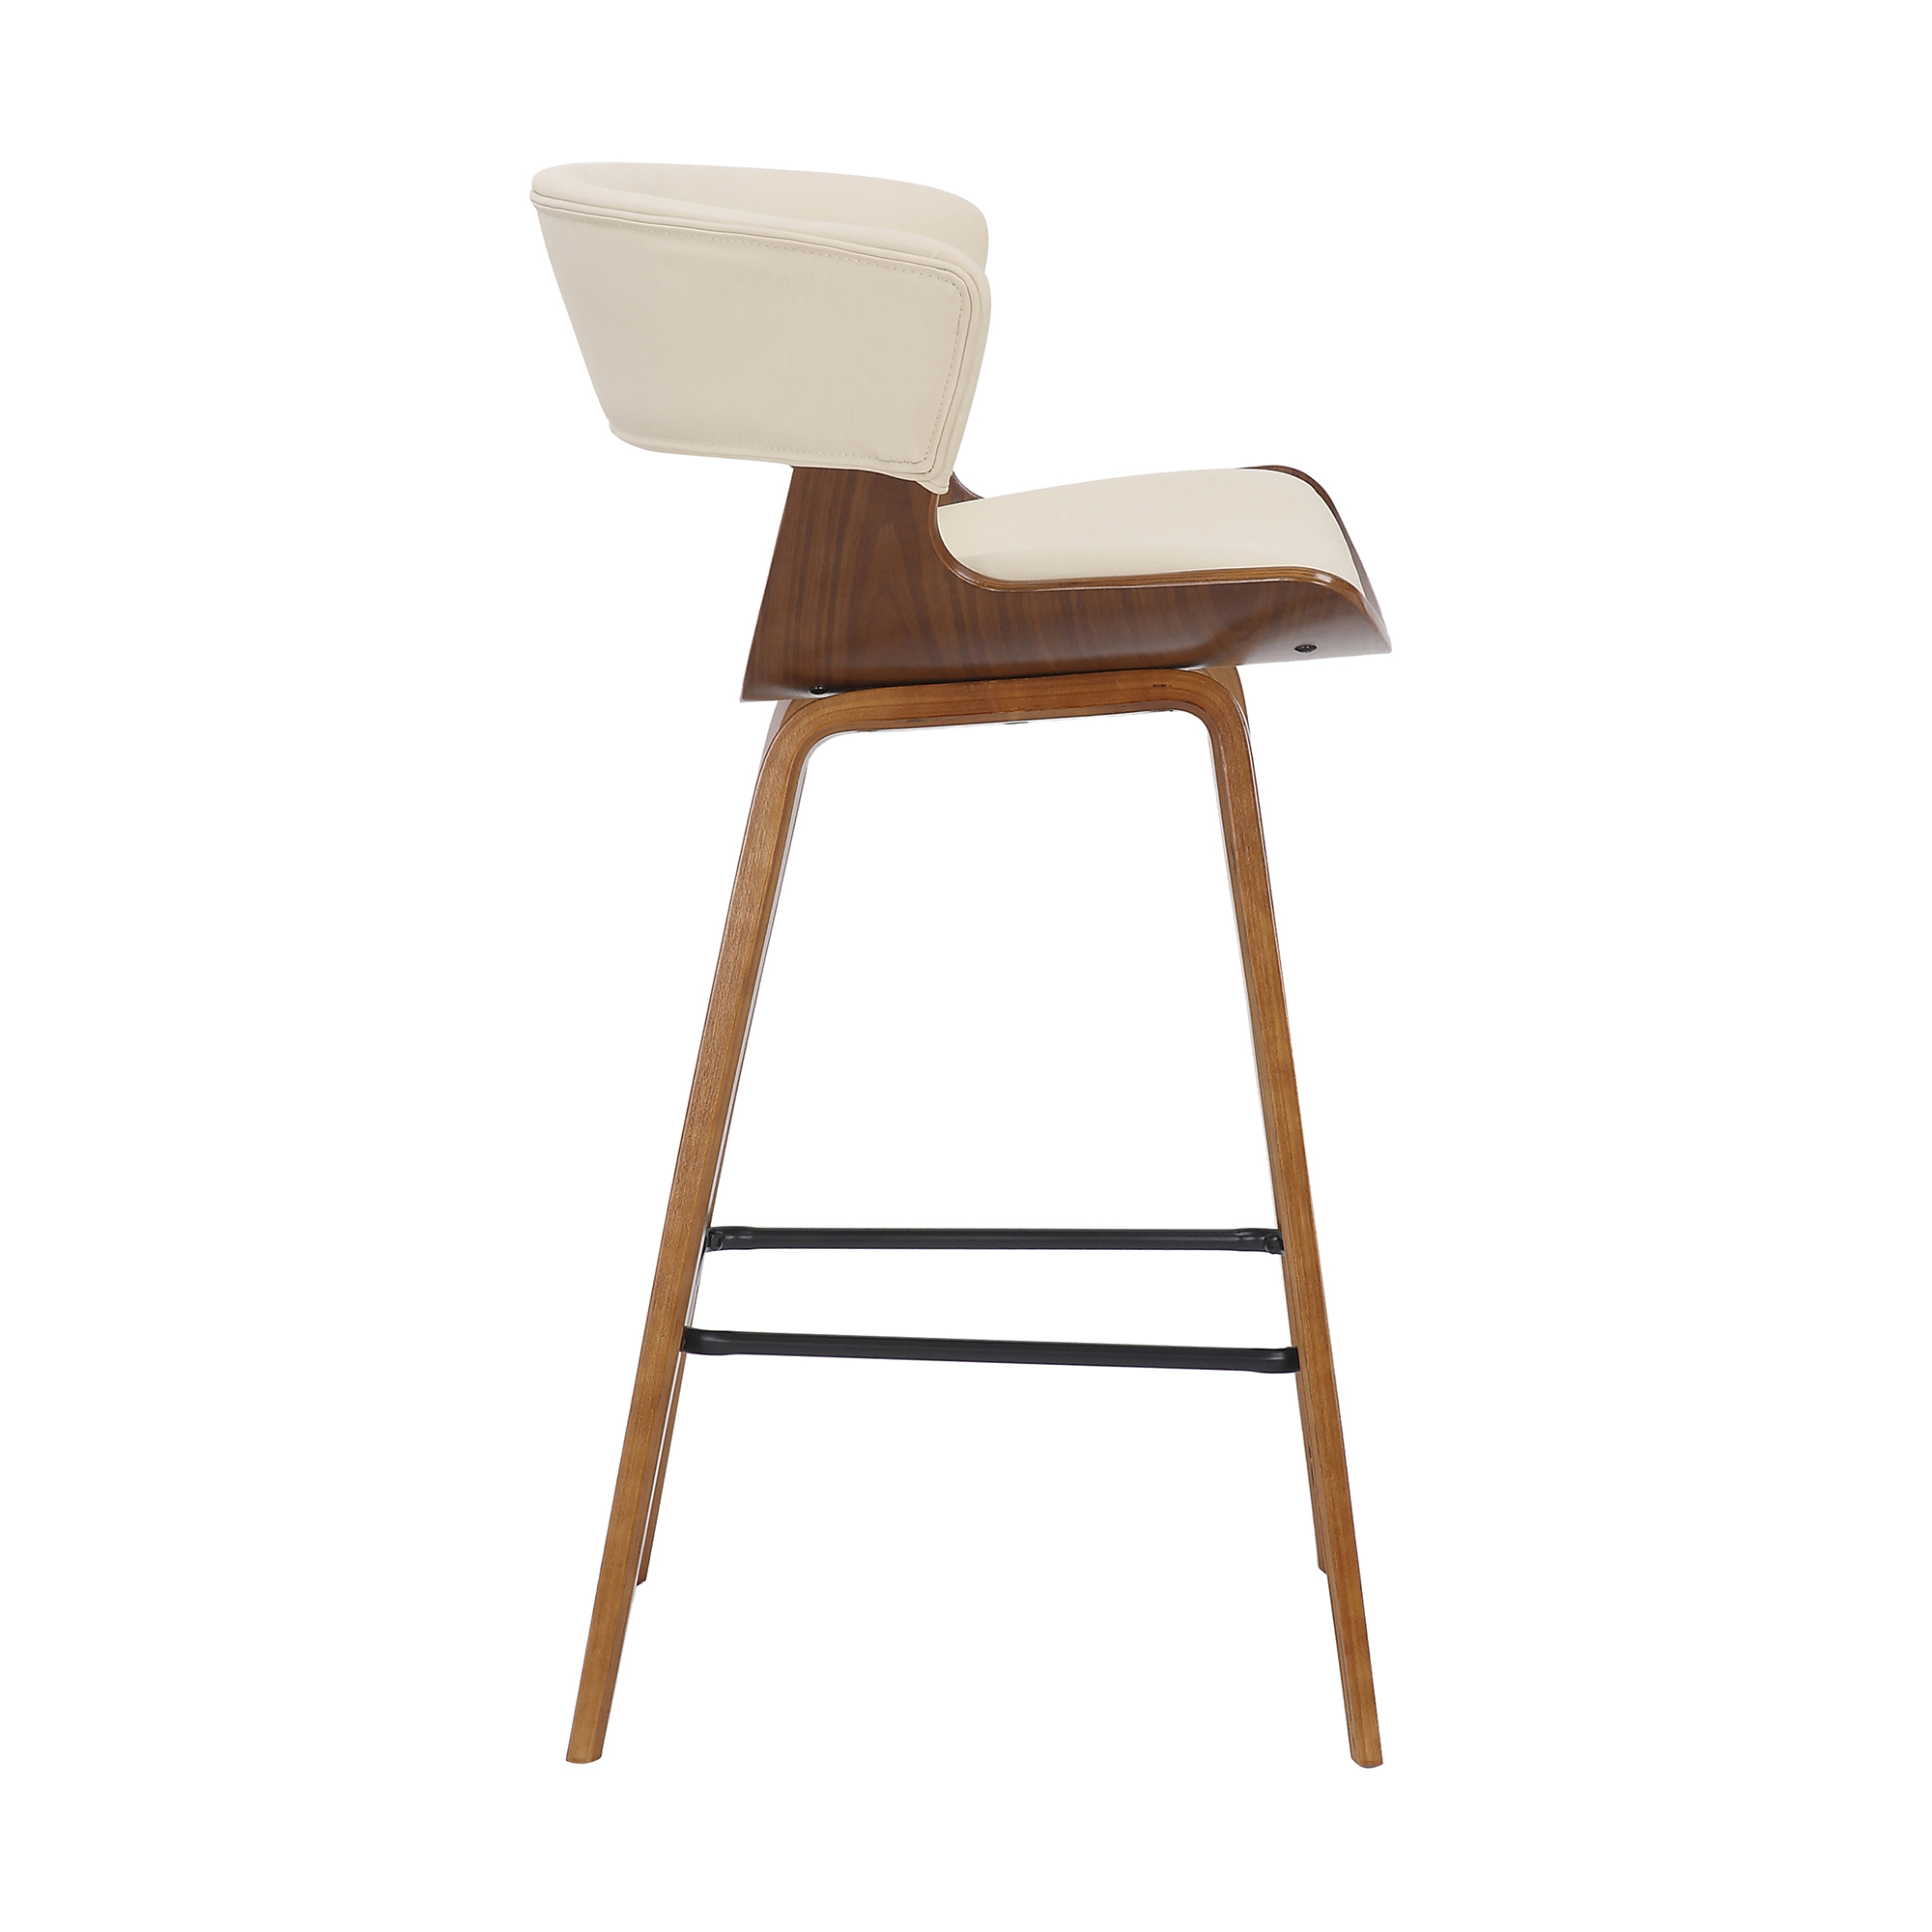 27 Inches Saddle Seat Leatherette Counter Stool, Cream And Brown - Saltoro Sherpi